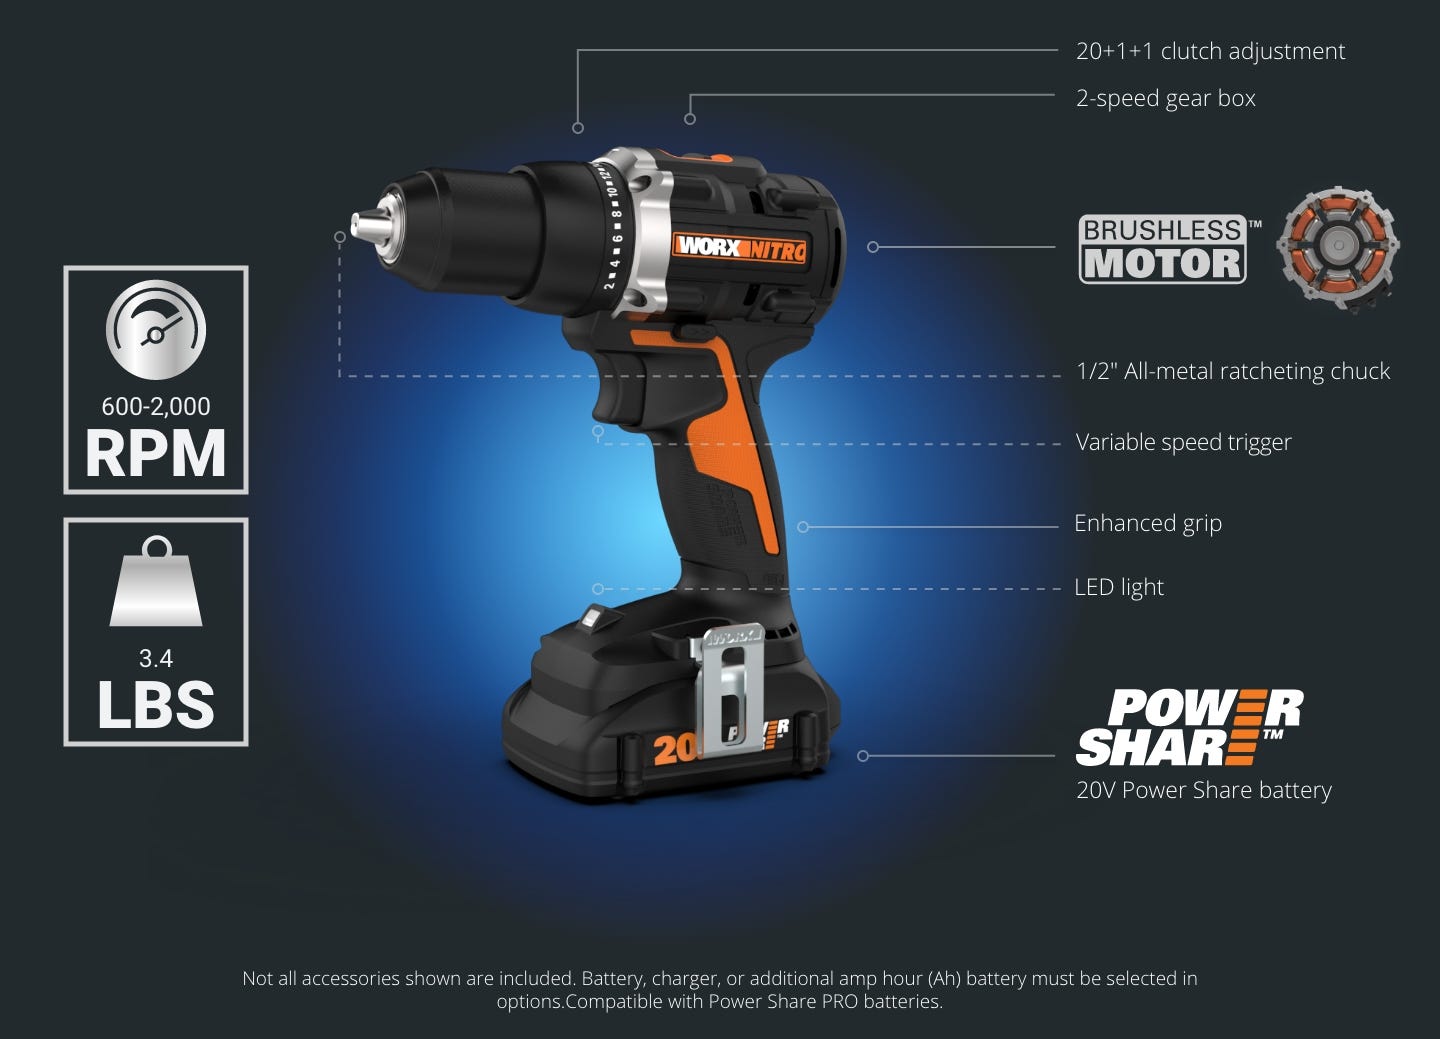 20v drill/driver featuring: 600-2000 RPM, 3.4 pounds, 20+1+1 clutch adjustment, 2-speed gear box, brushless motor, 1/2 inch all-metal ratcheting chuck, variable speed trigger, enhanced grip, LED light, 20V power share battery, not all accessories included